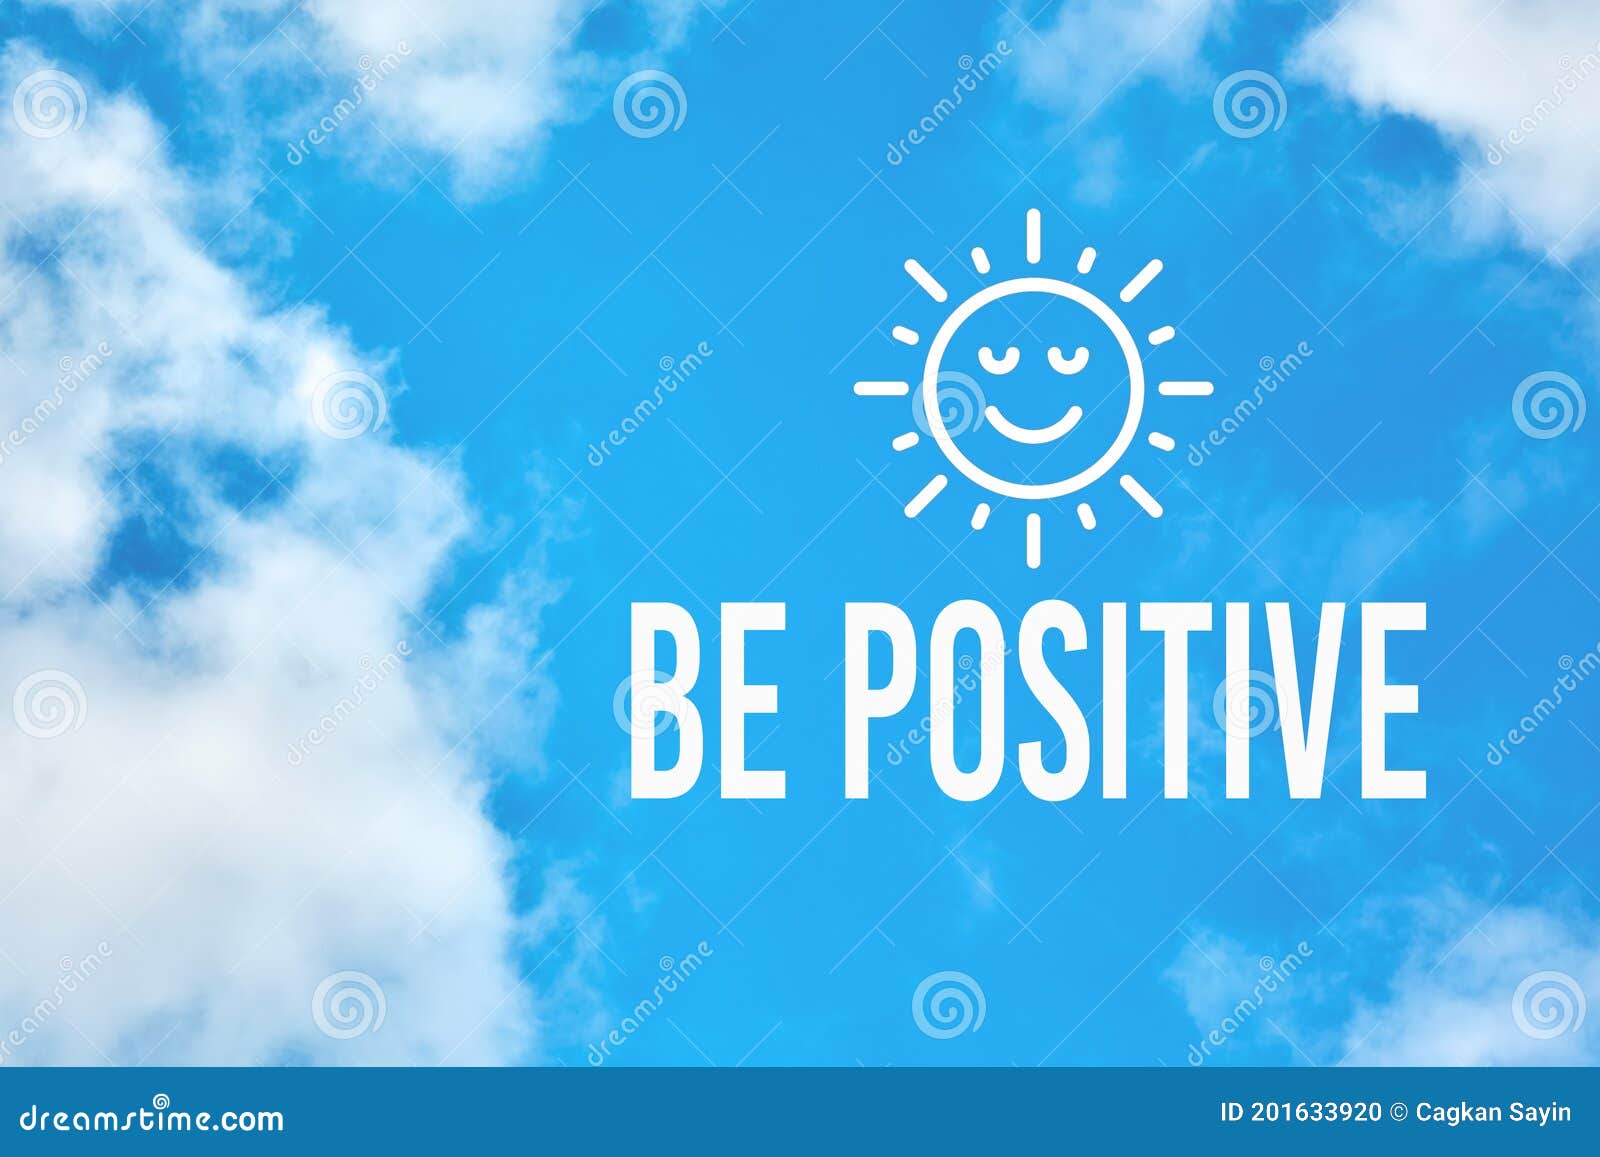 Be Positive Inspirational or Motivational Quote Against Blue Sky ...